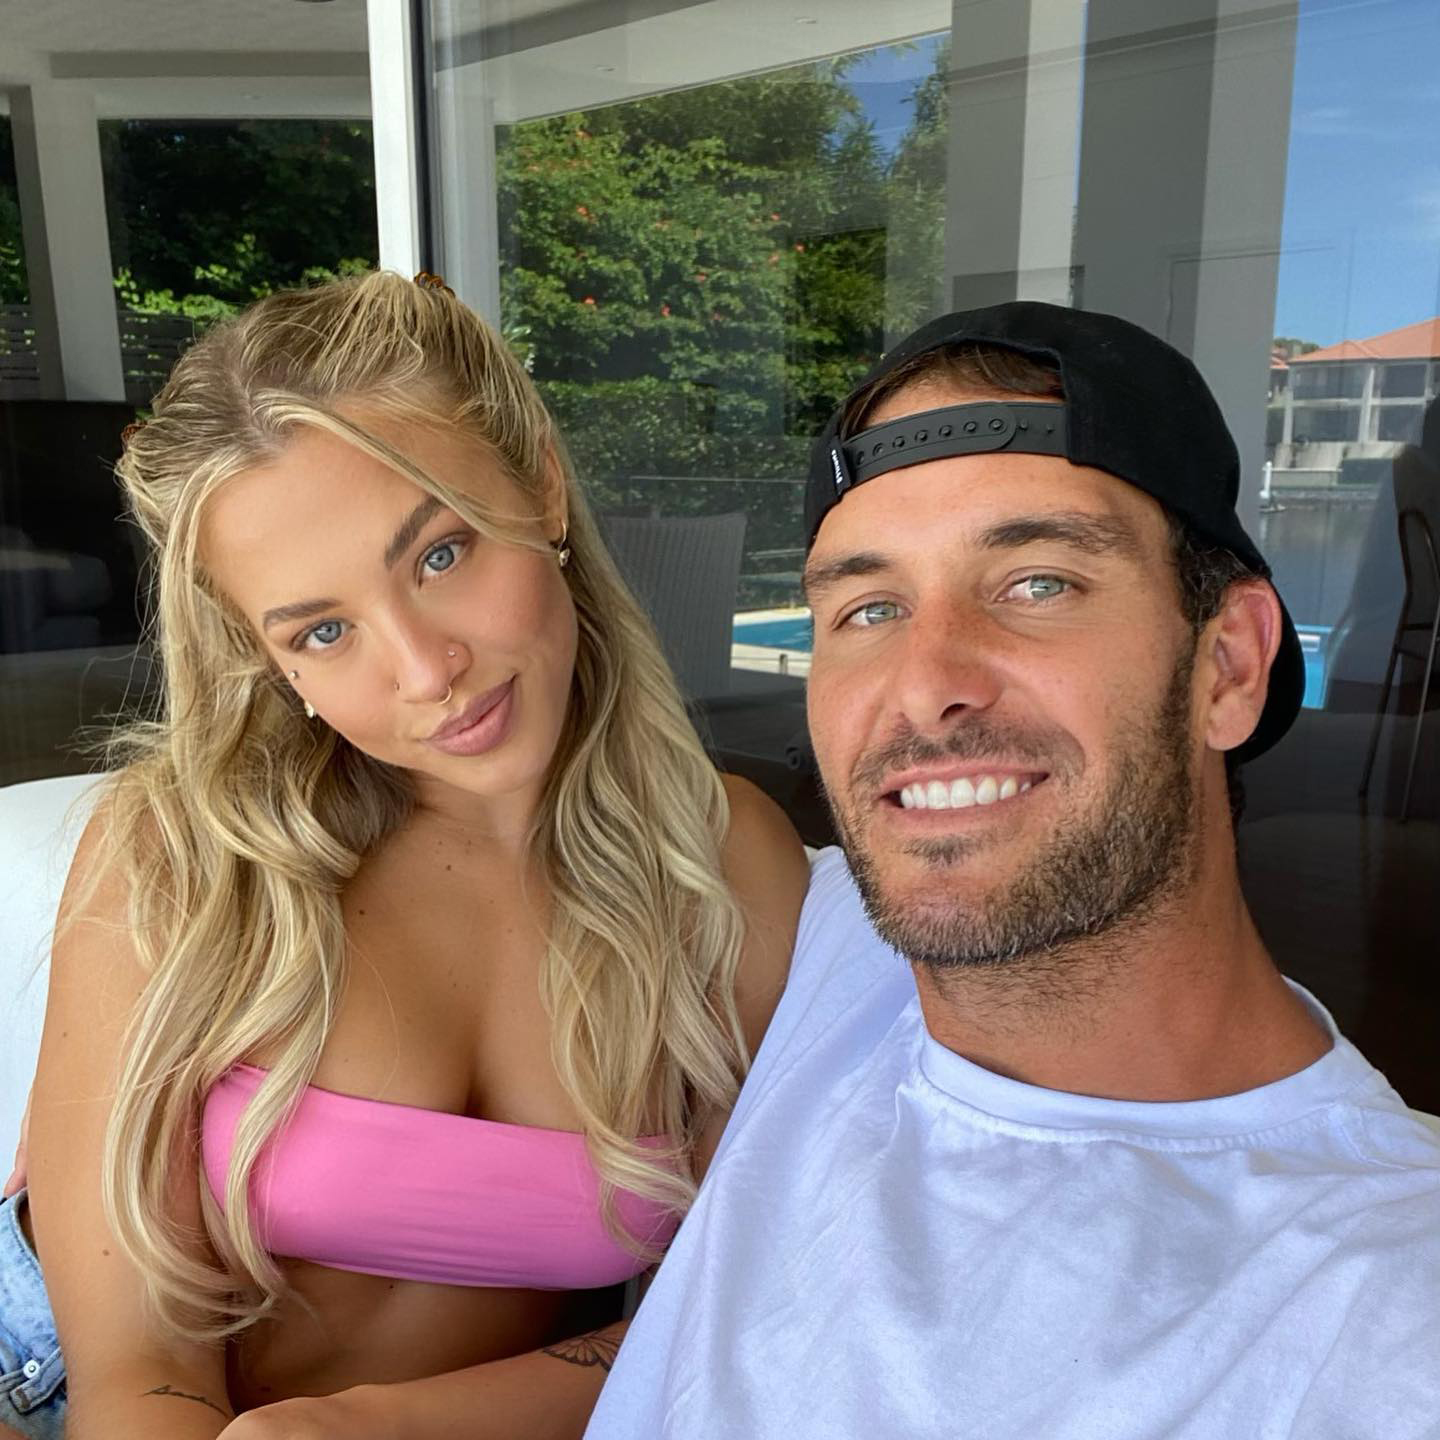 Baby Makes 3! YouTuber Tammy Hembrow, Matt Poole Welcome 1st Child